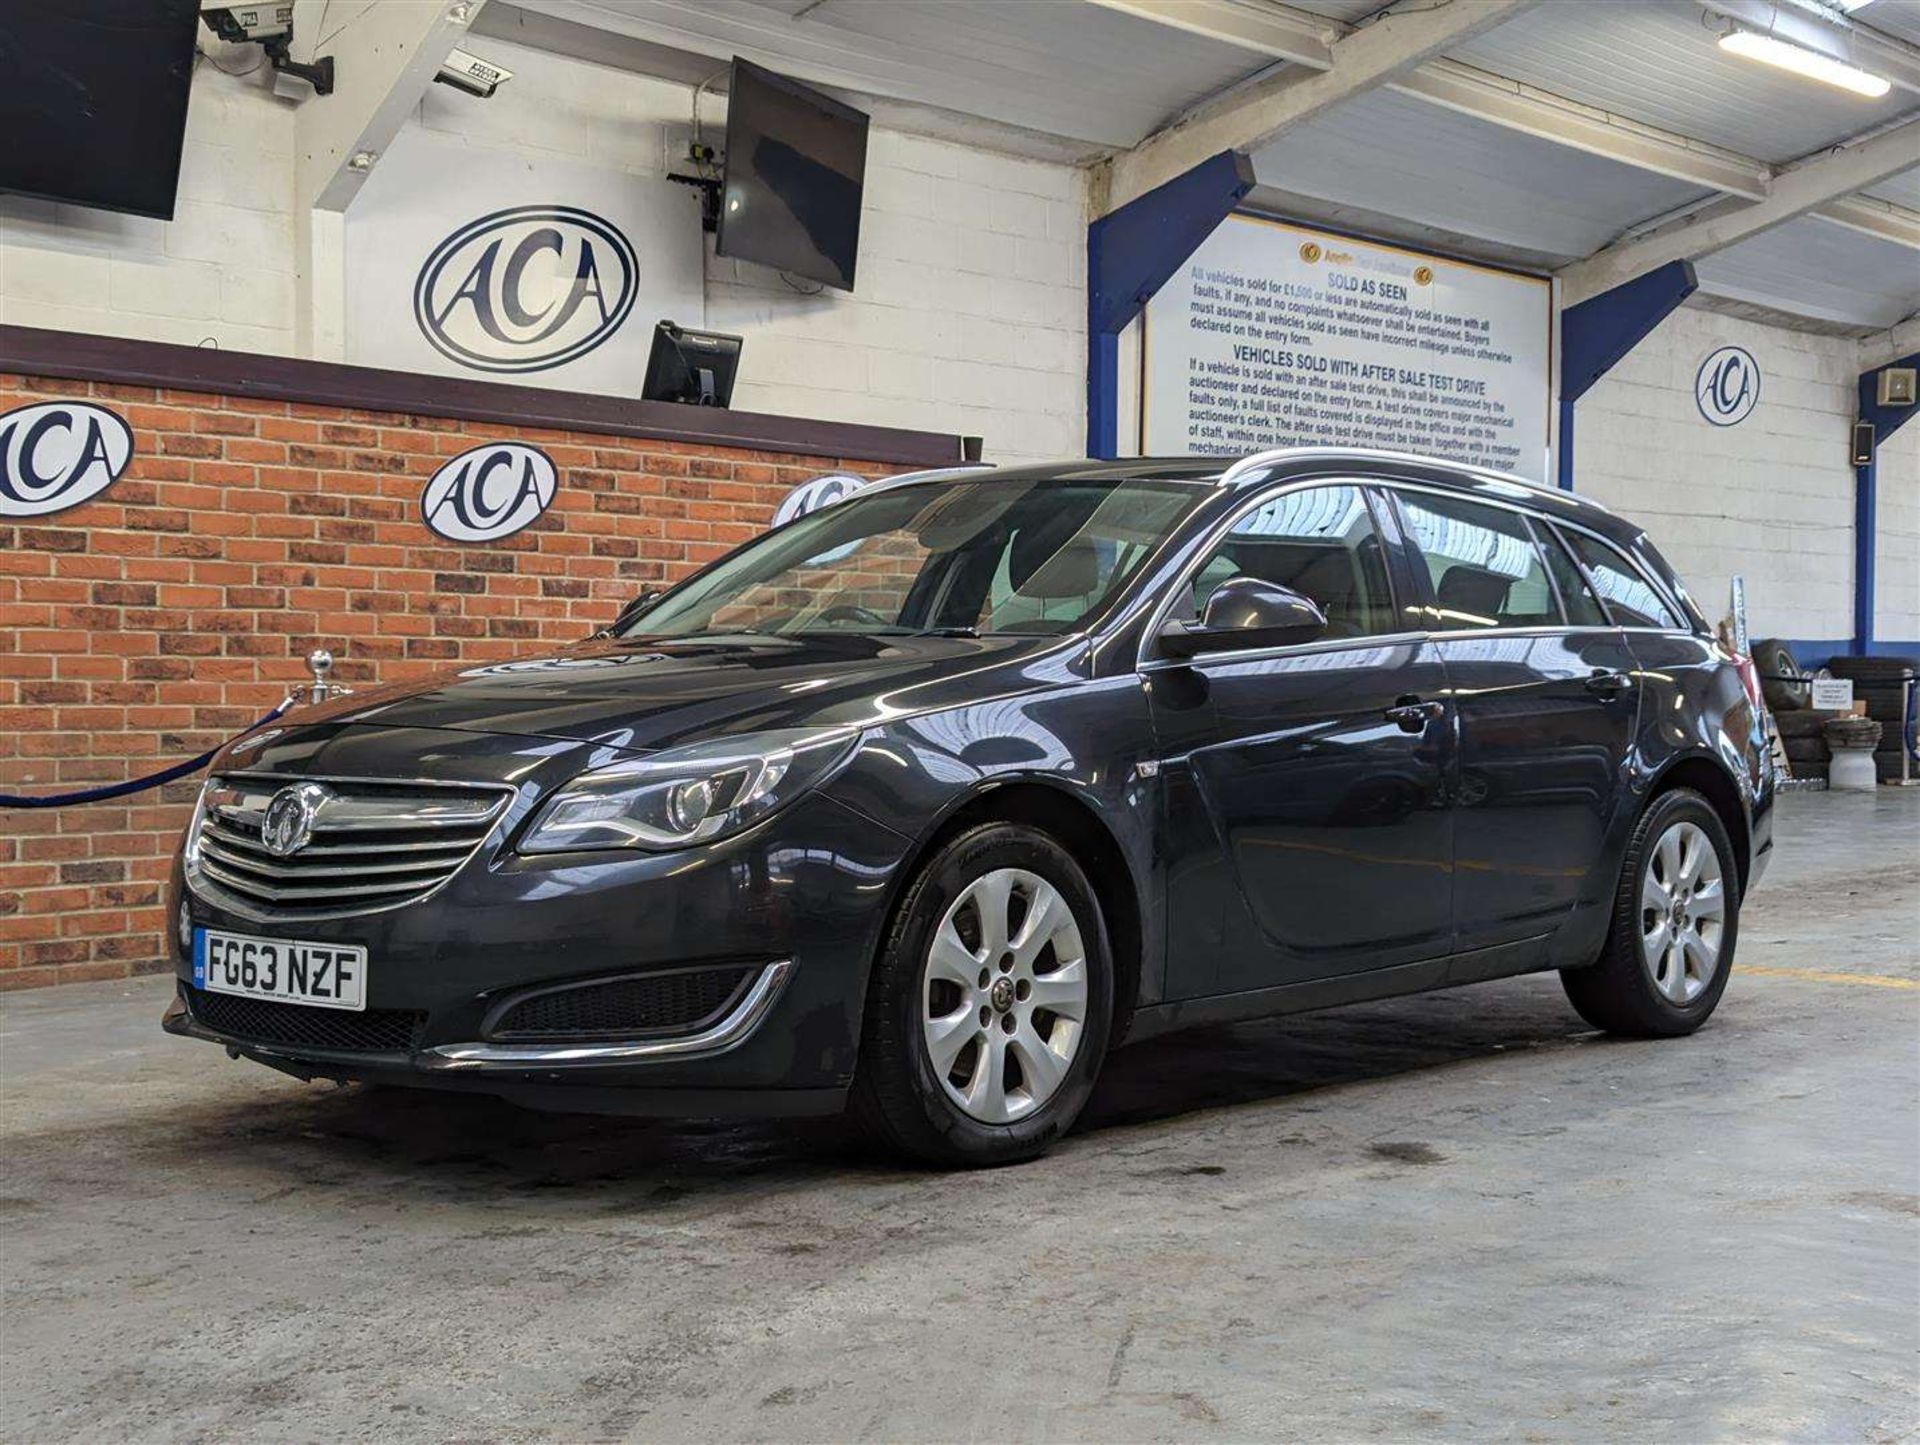 2013 VAUXHALL INSIGNIA **SOLD